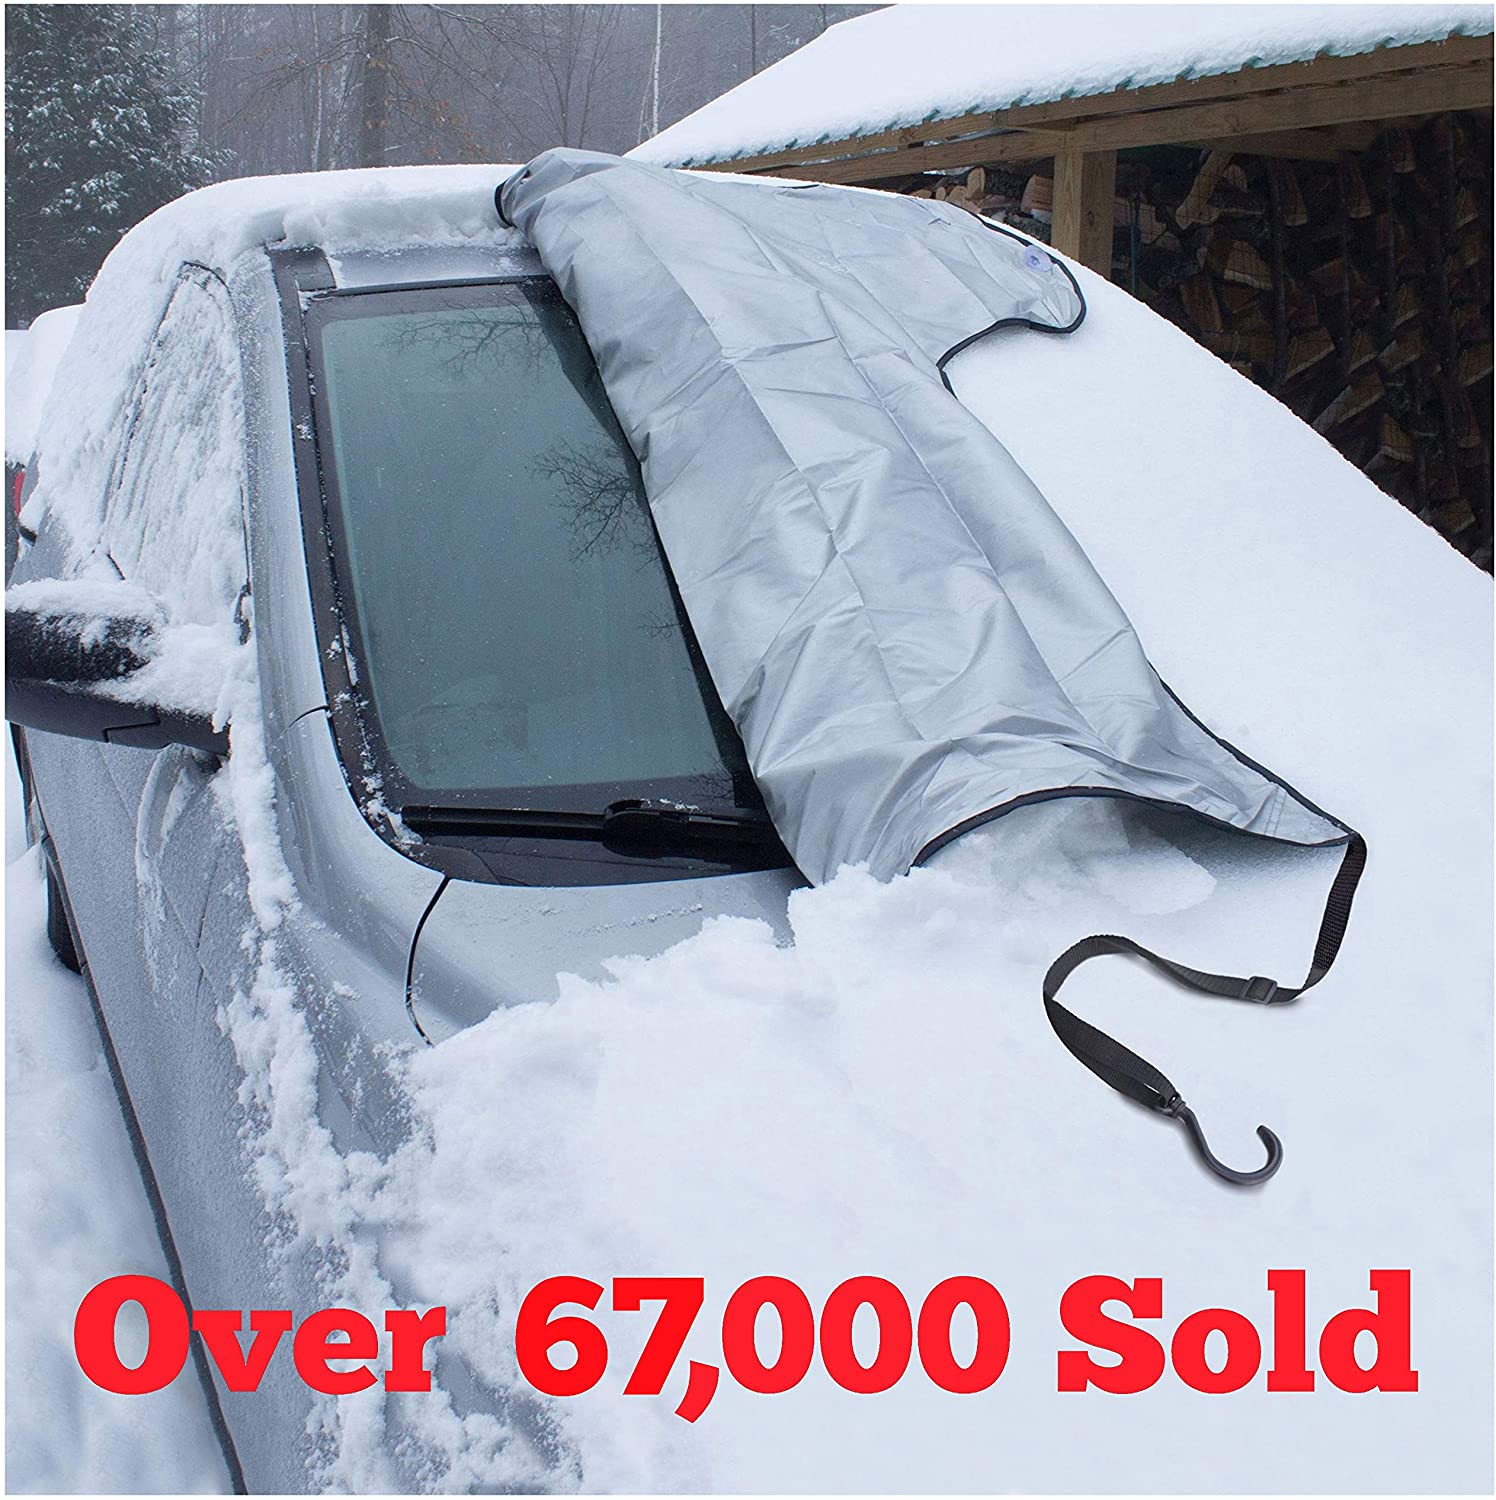 2021 Newest Windshield Snow Cover Drakefyre Car Magnetic Winter Windshield Frost Protector Cover with Two Mirror Covers Waterproof Dust Cover Sun Protector in Any Weather Suitable for Most Vehicle 90in x 66in x 55in